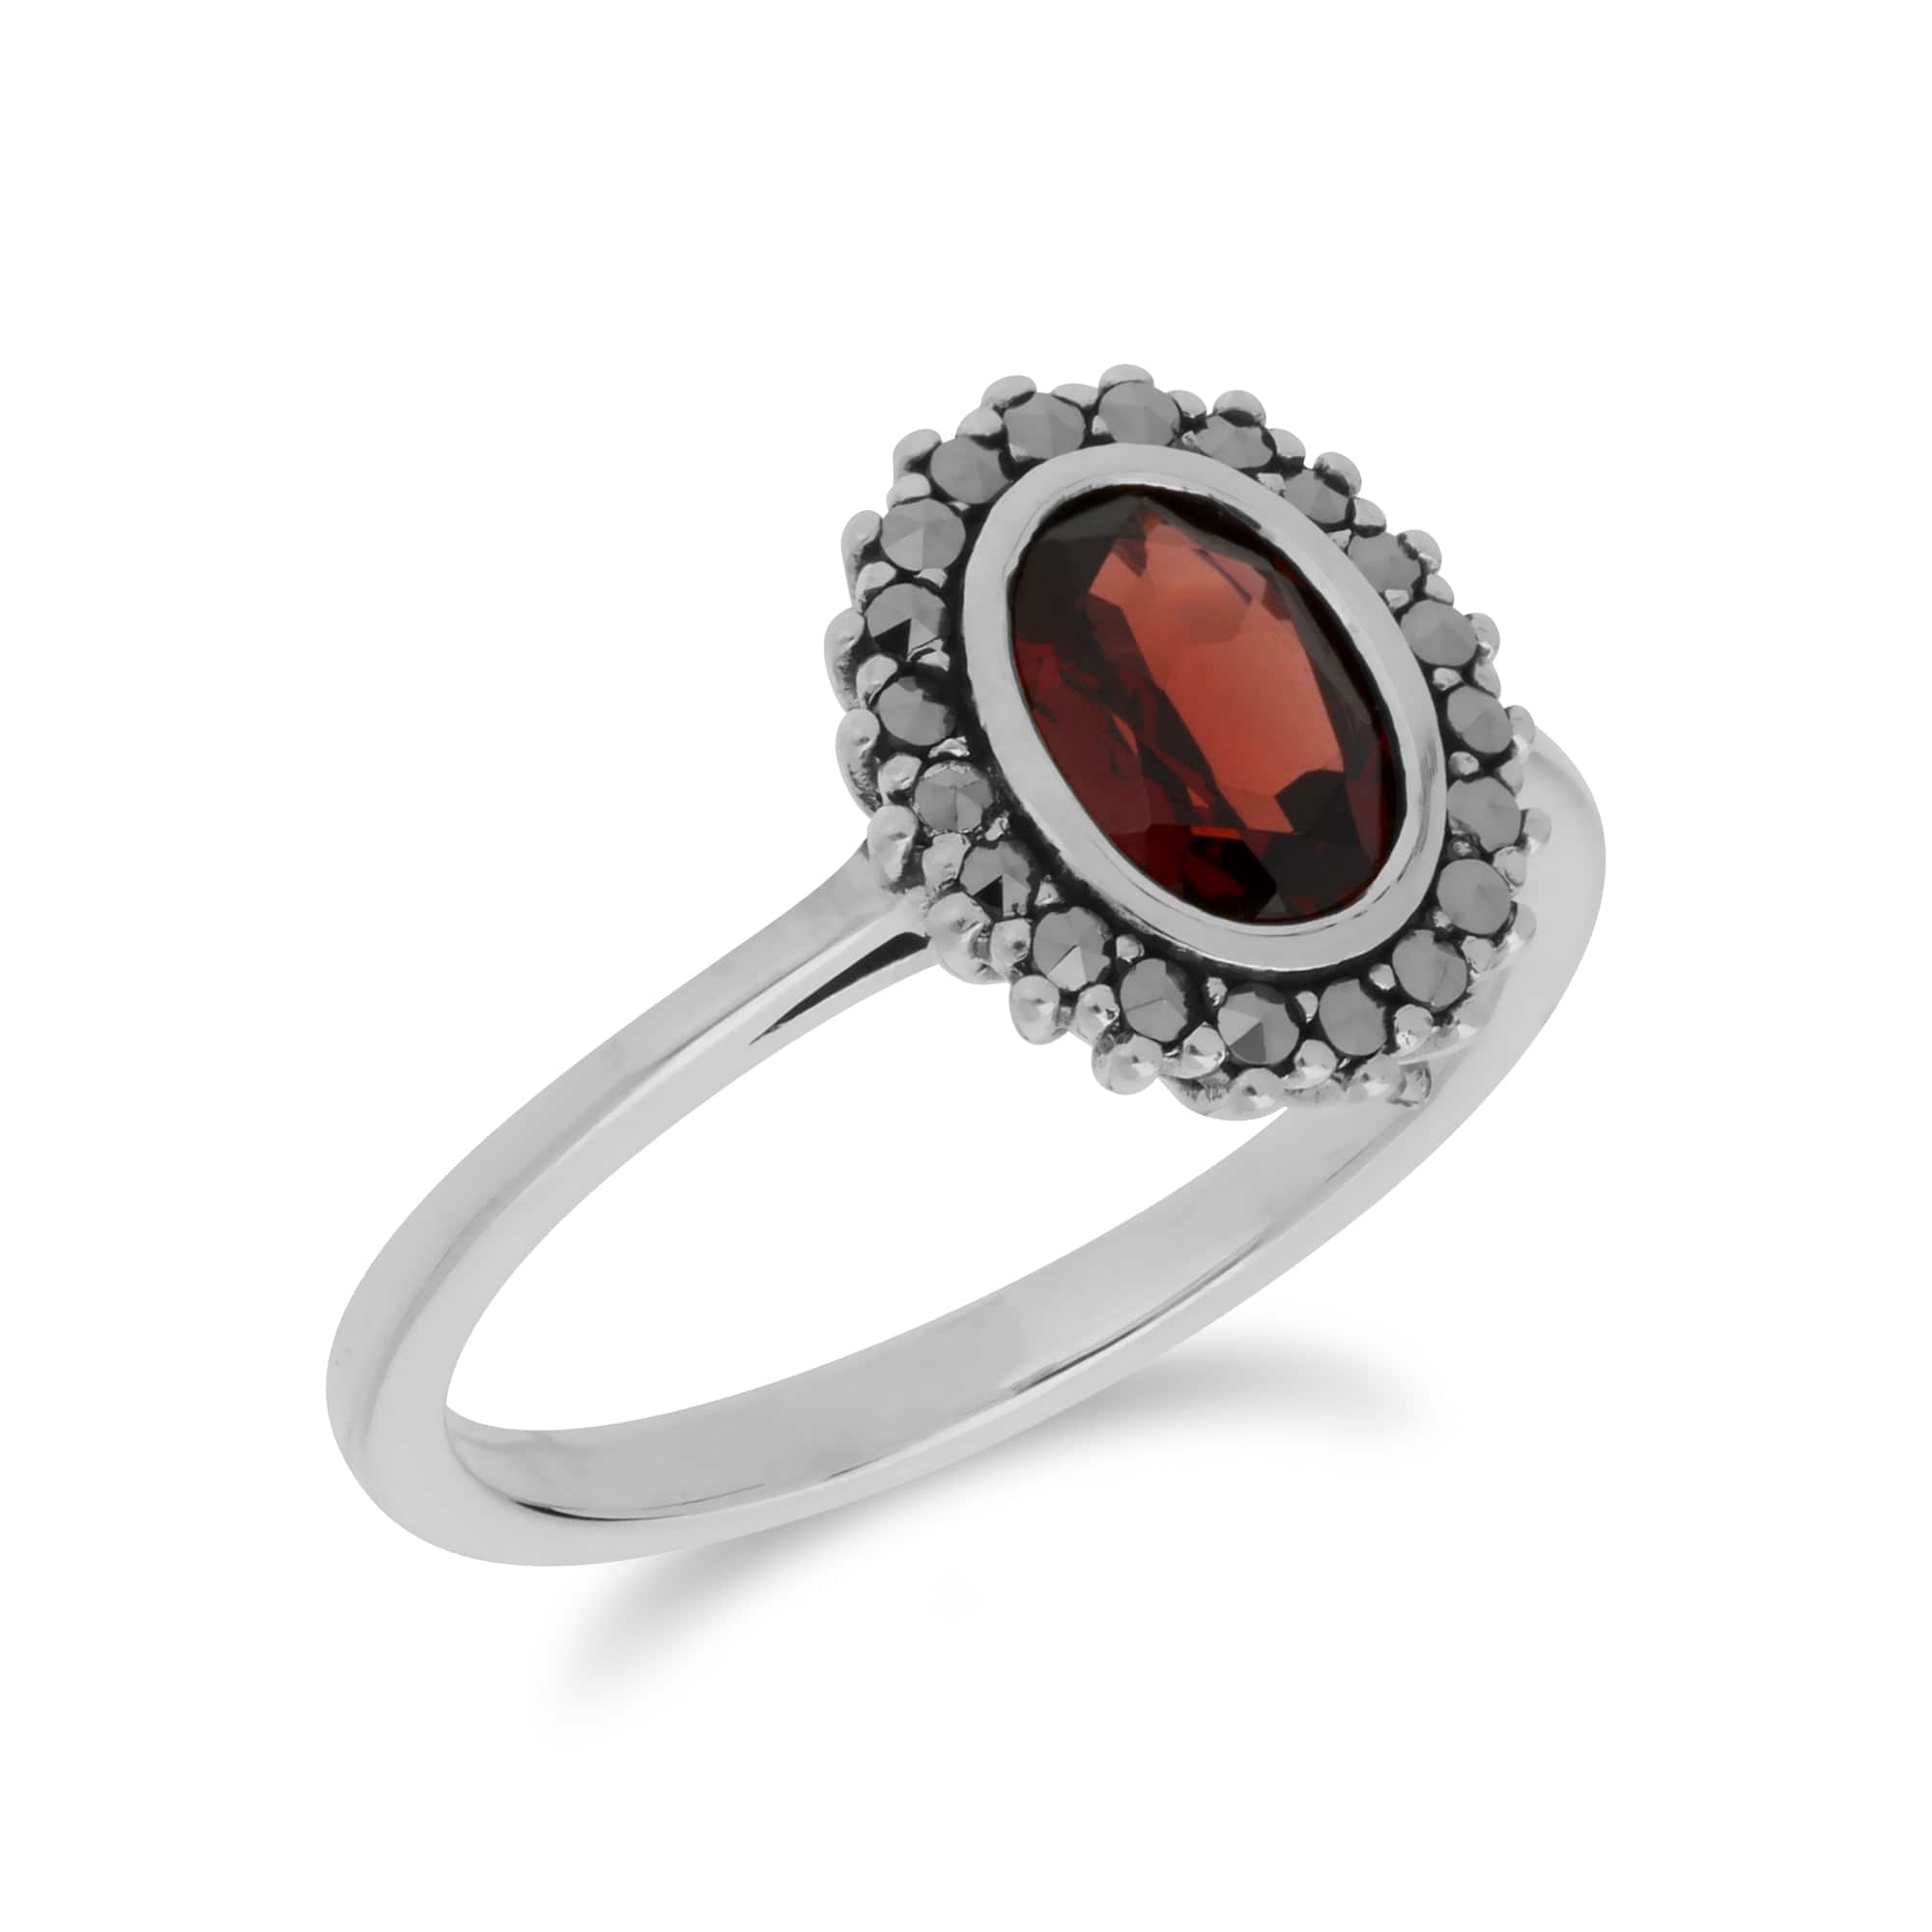 214R599703925 Art Deco Style Oval Garnet & Marcasite Halo Ring in 925 Sterling Silver 2